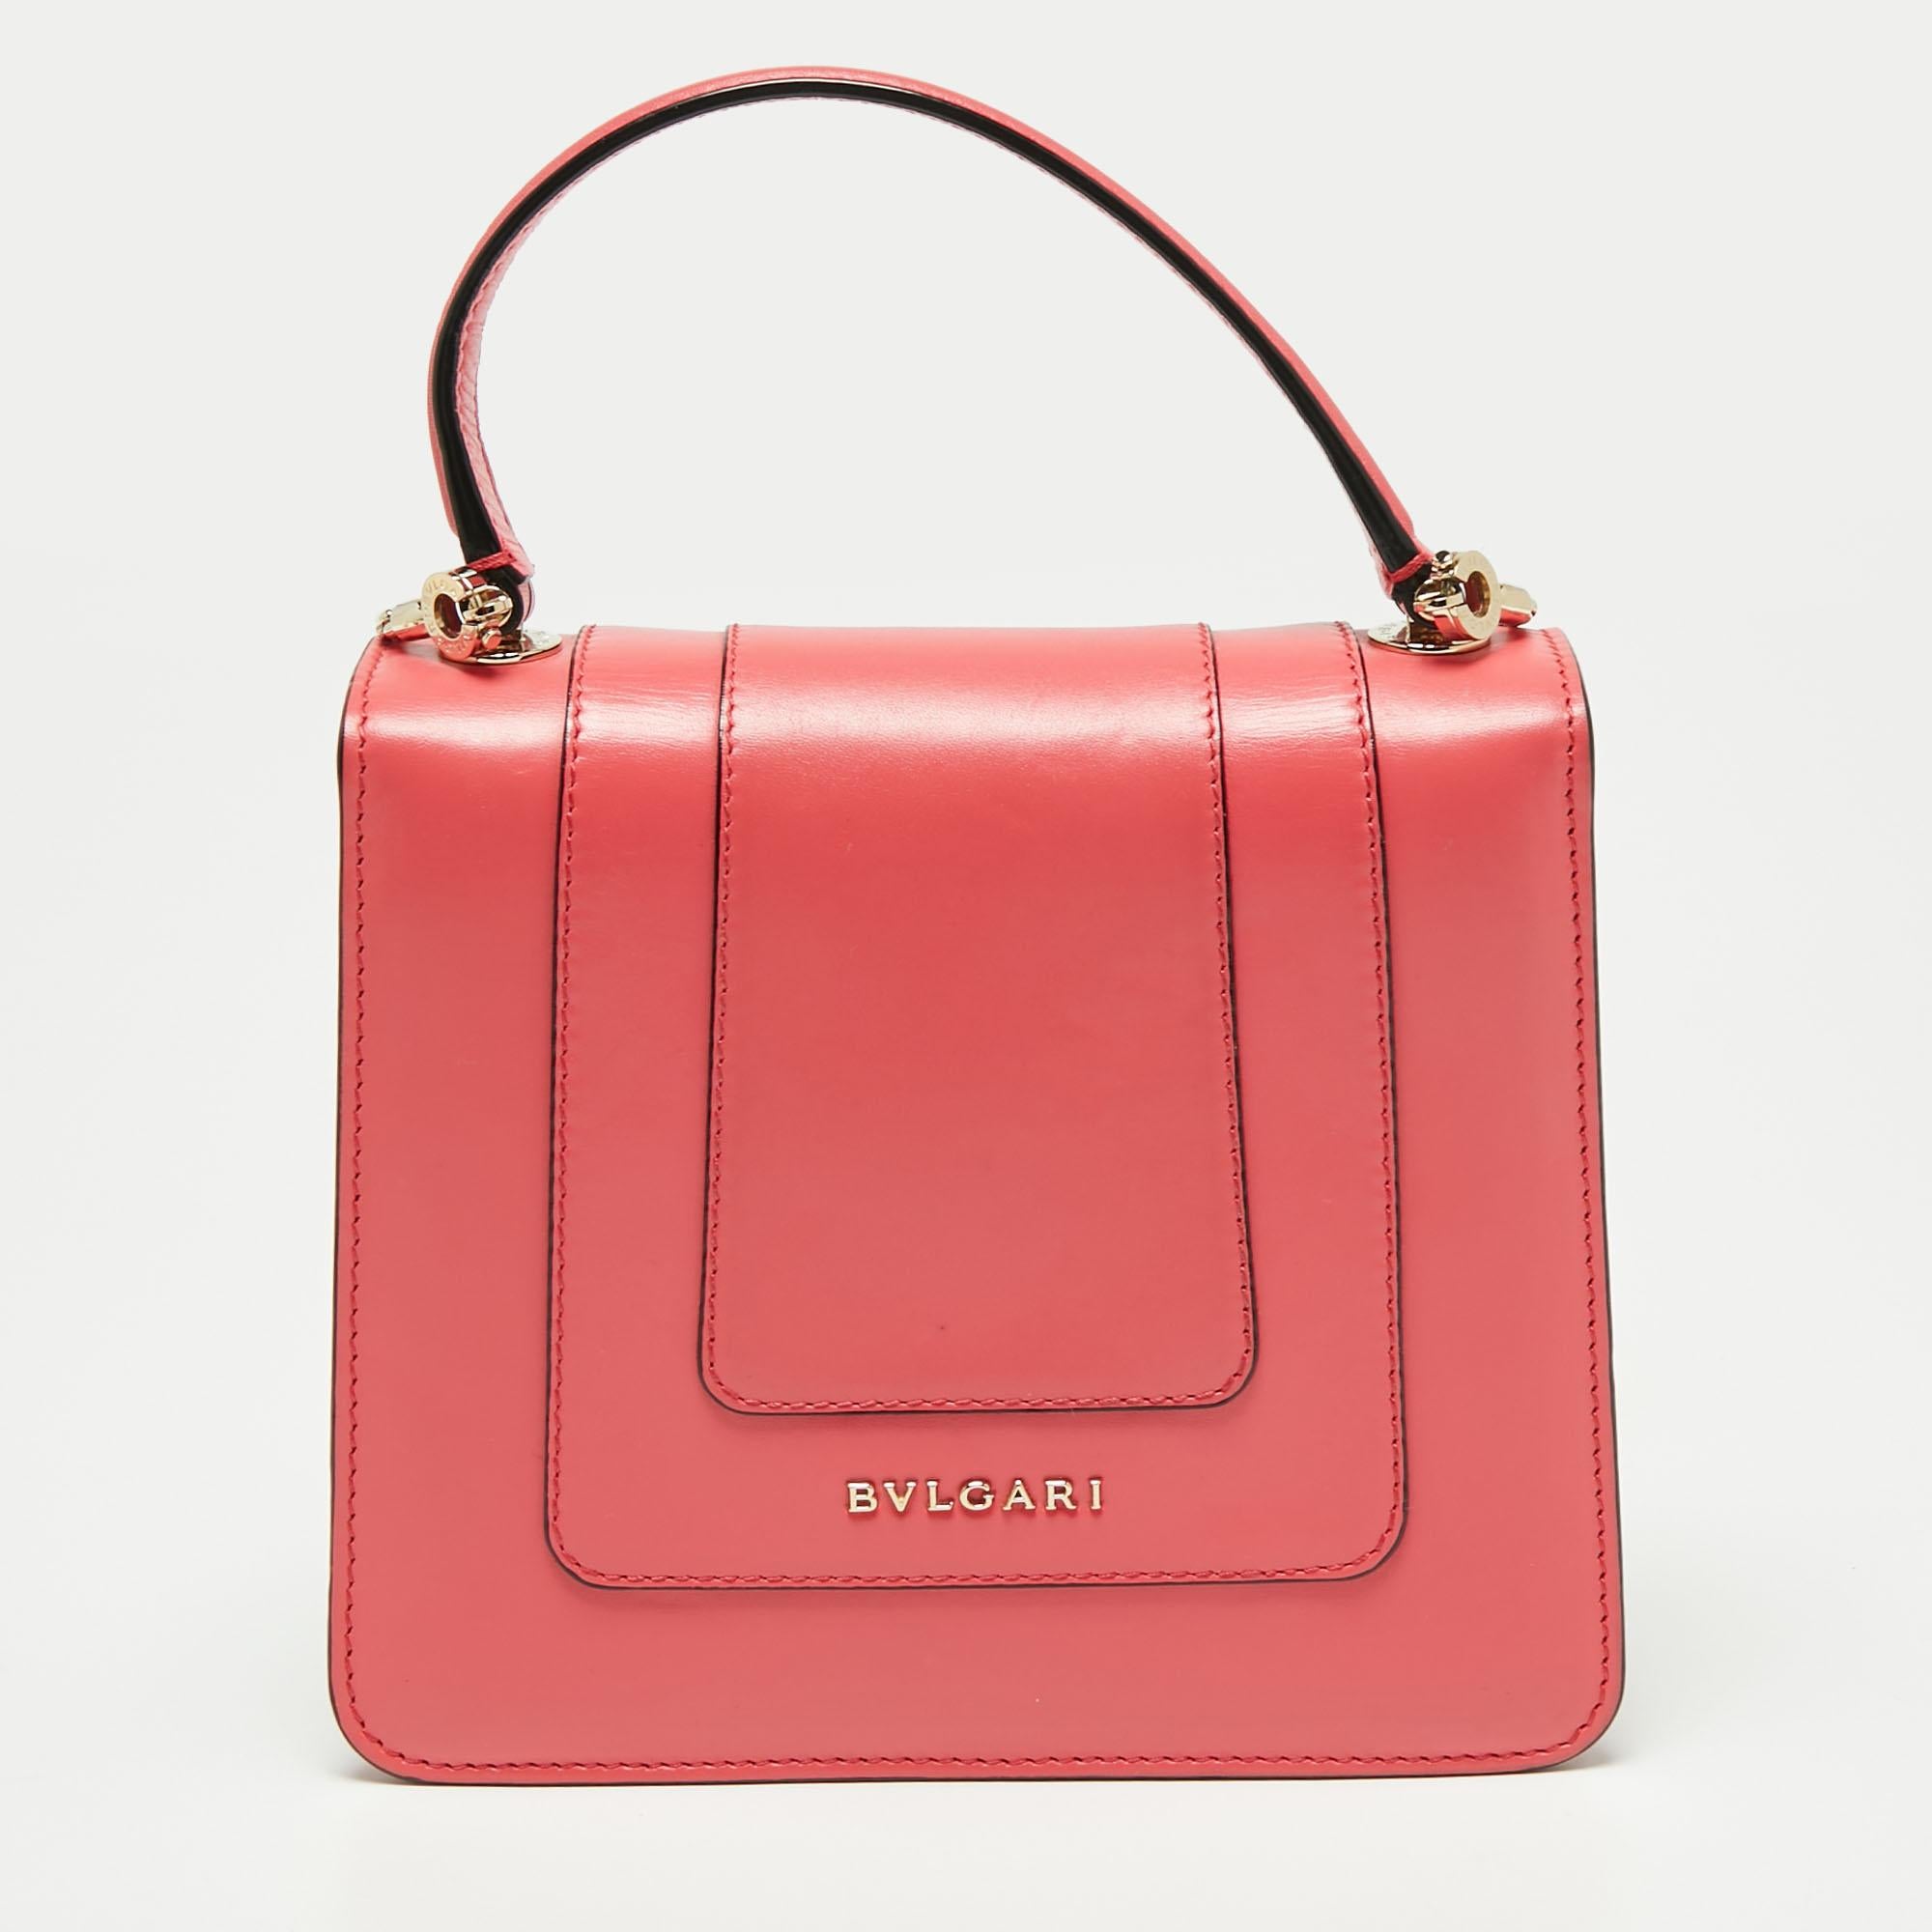 Add a dazzling element to your style with this stunning Bvlgari creation. Crafted from pink leather, the bag has a flap with the iconic Serpenti head closure. The bag has a fabric-lined interior, a top handle, and a strap for an easy carrying